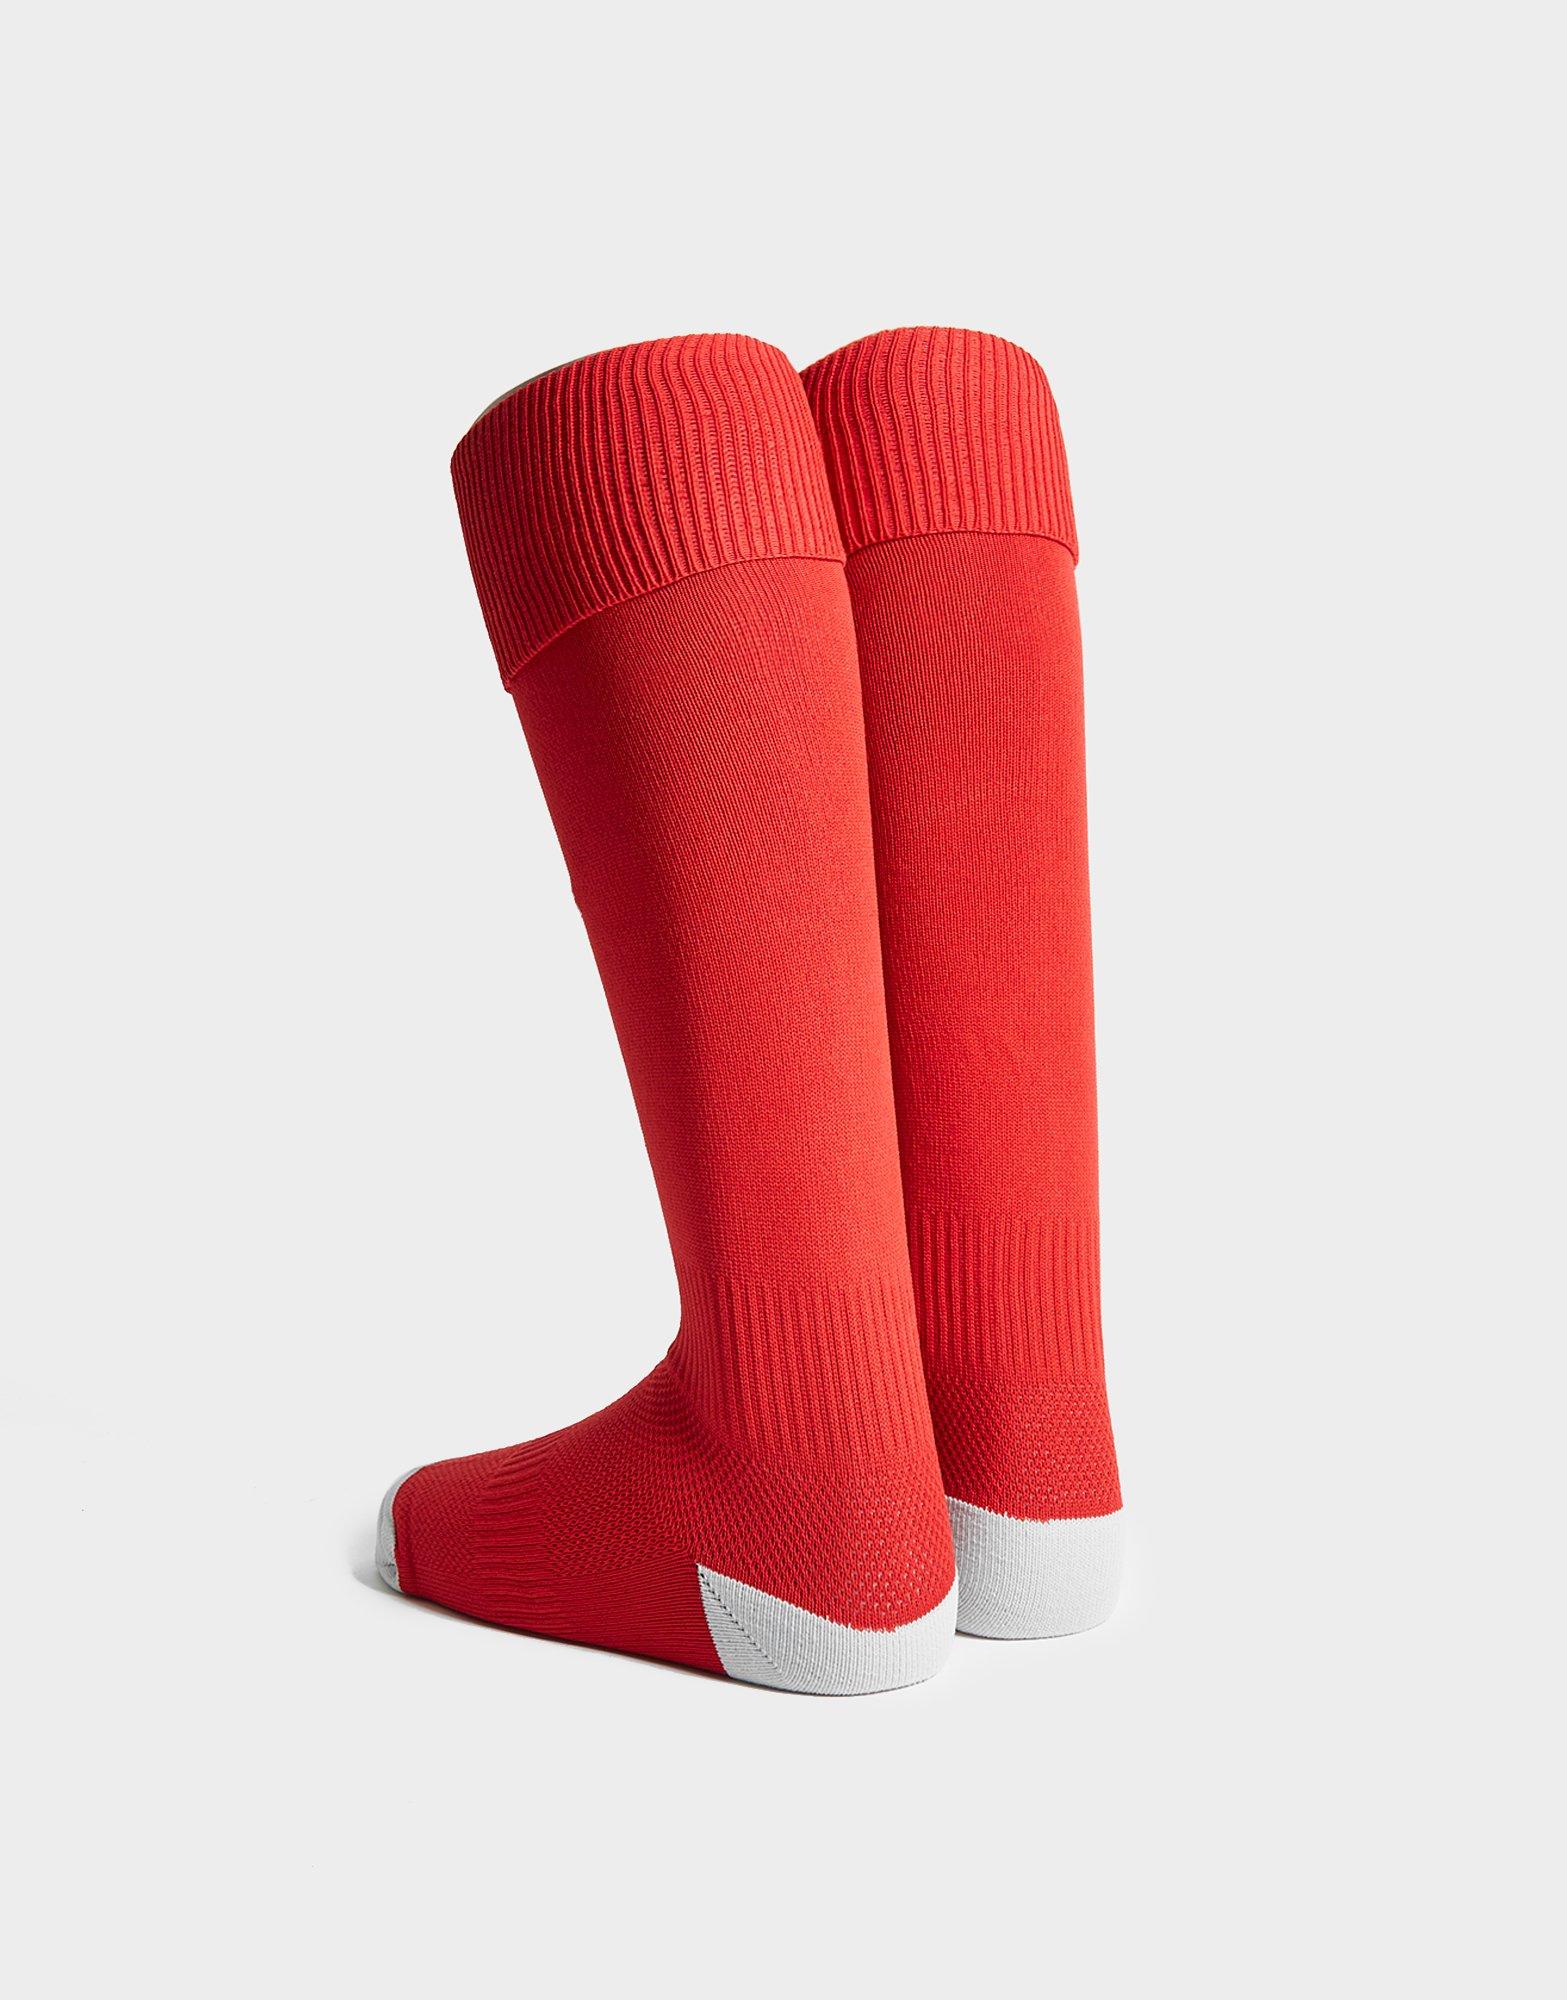 Chaussettes de football milano 23 rouge - Adidas